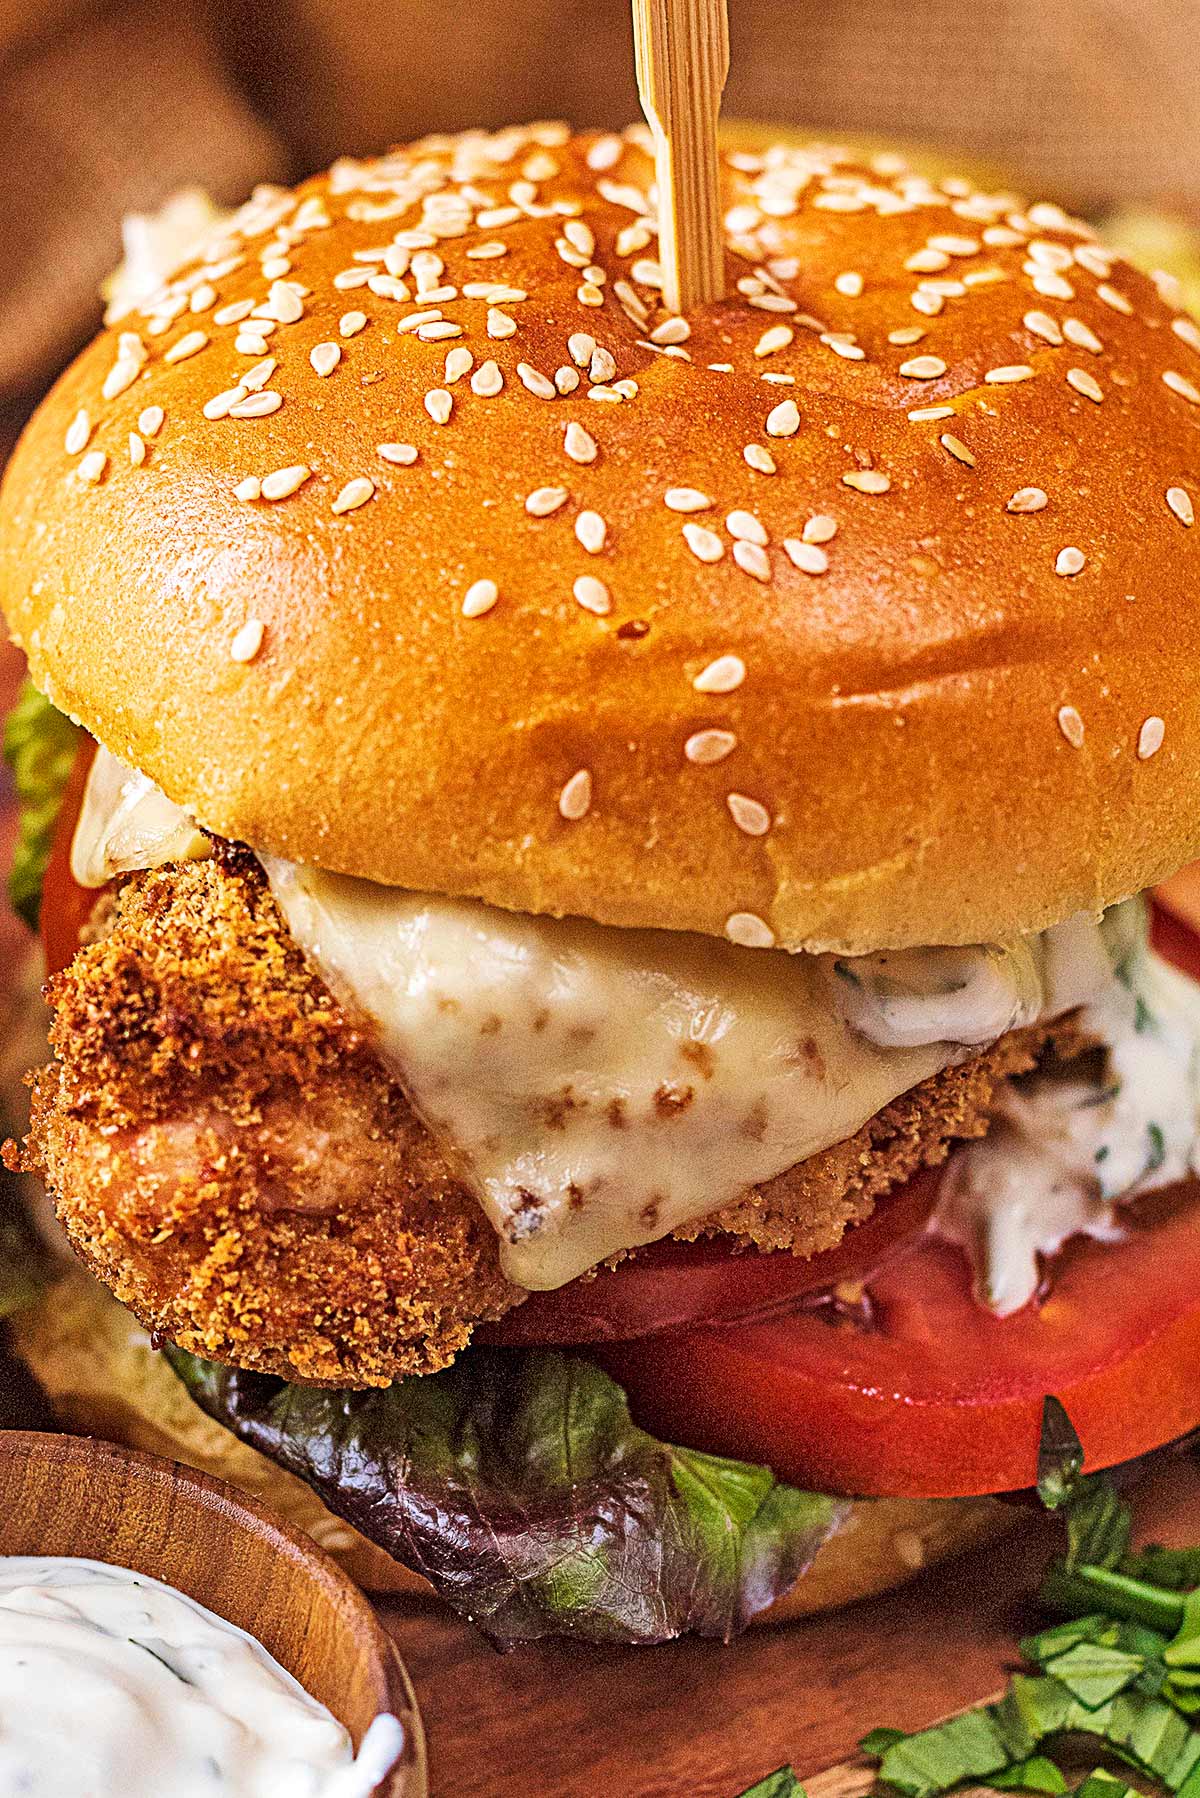 Breaded chicken topped with cheese in a sesame seed brioche bun with lettuce and tomato